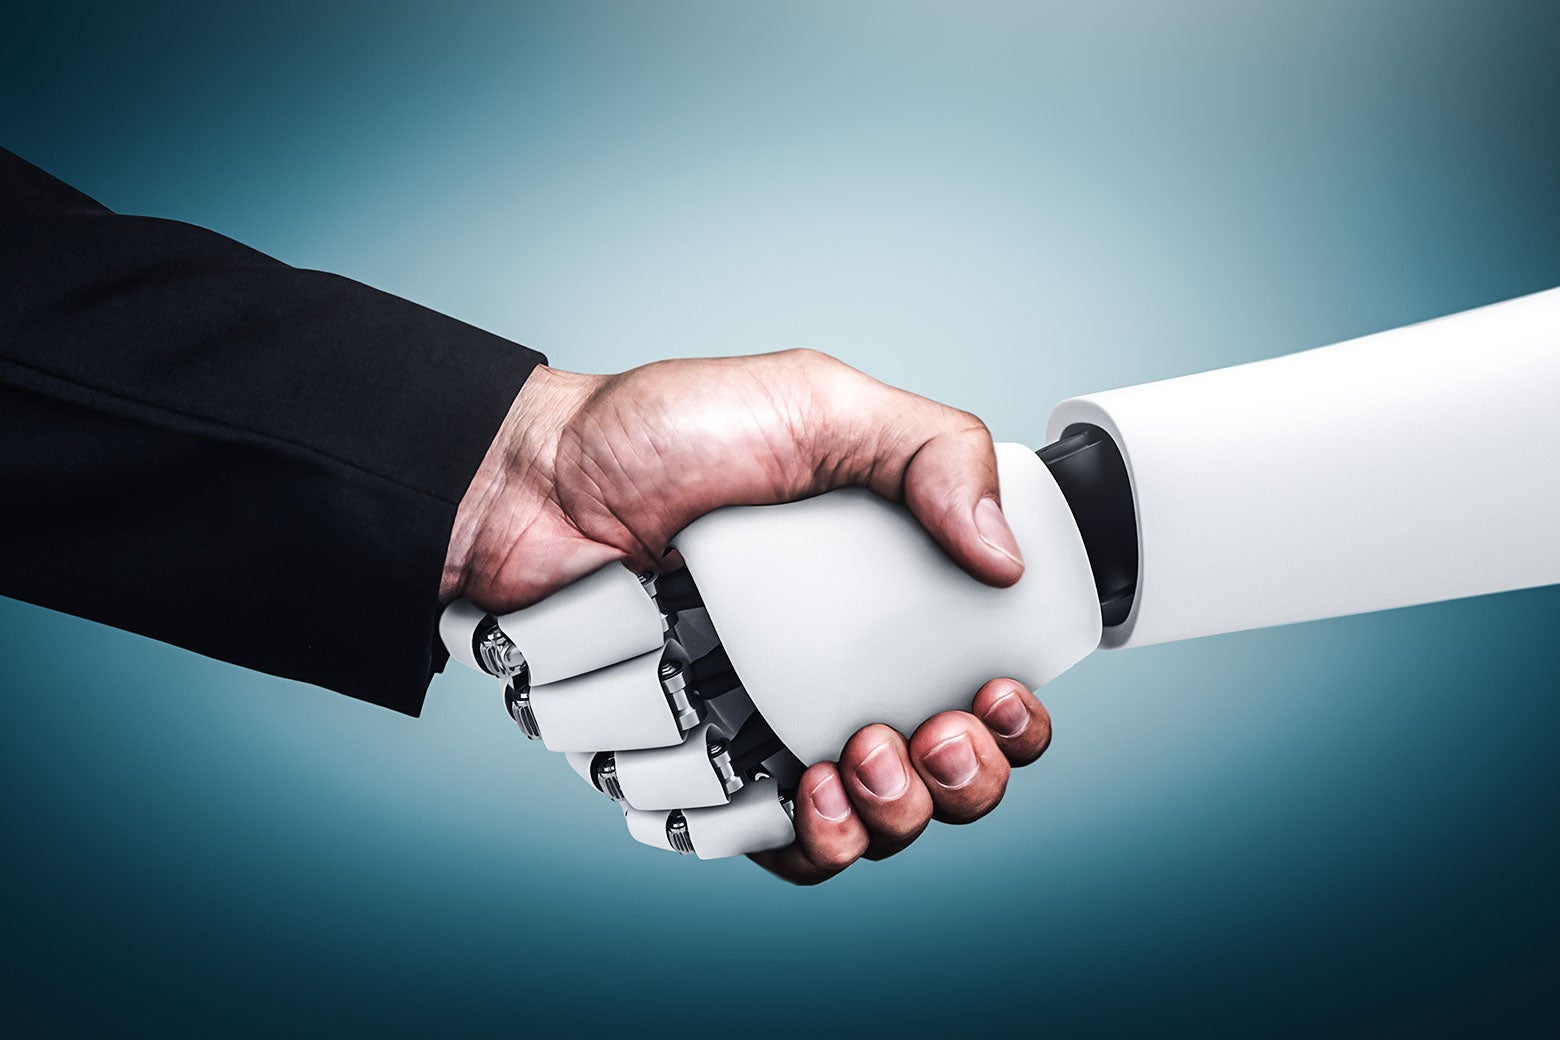 A robot hand and a human hand in a suit shake hands.